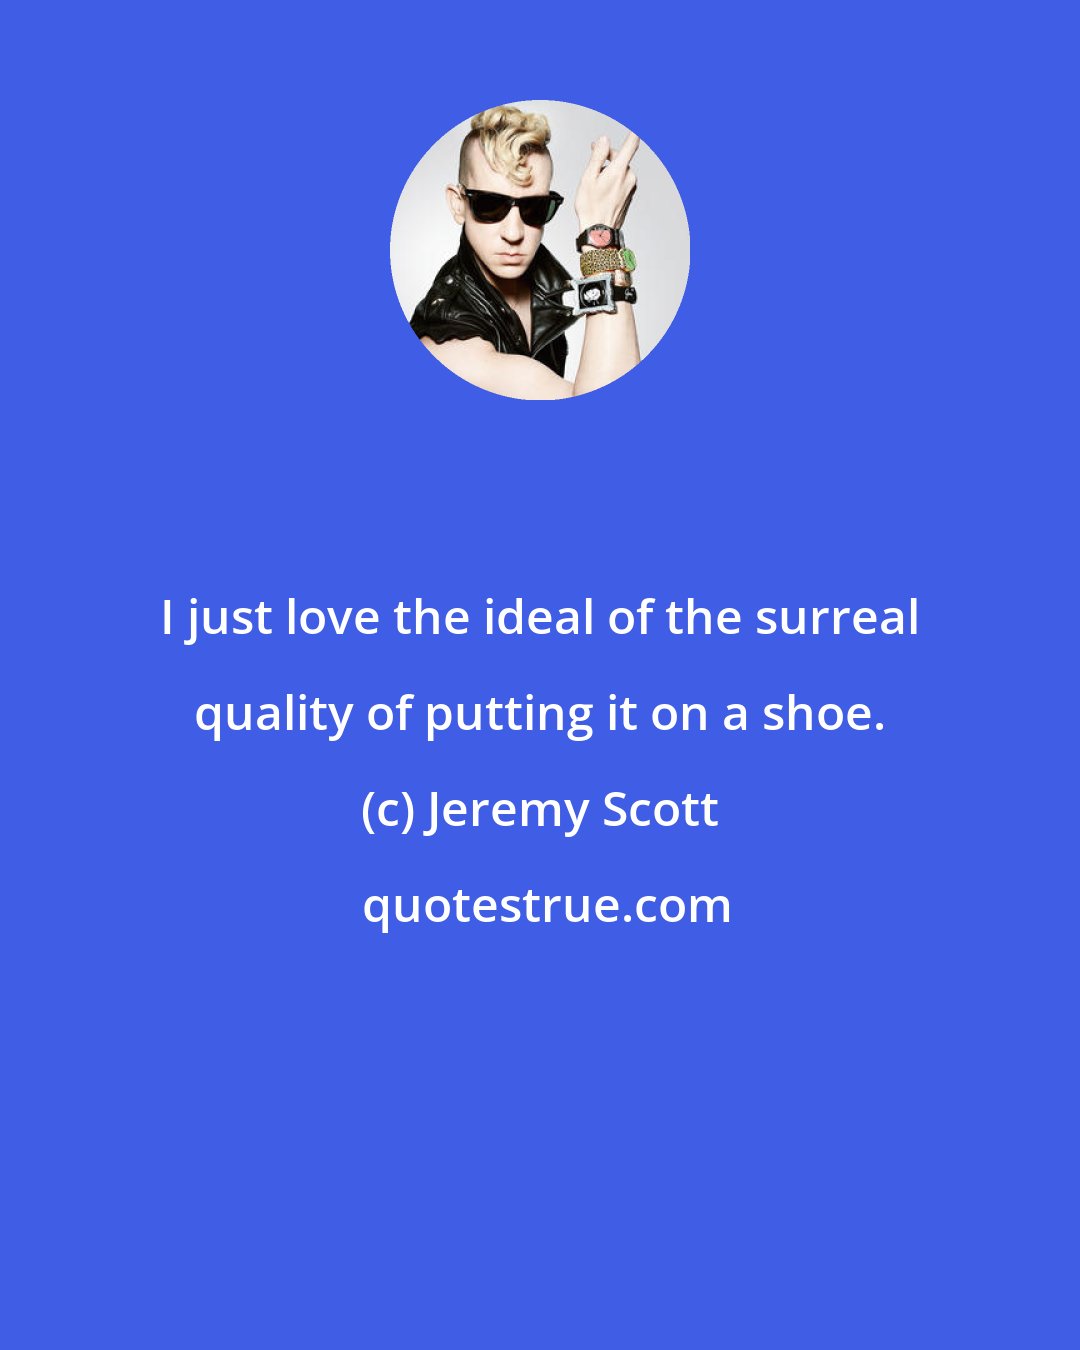 Jeremy Scott: I just love the ideal of the surreal quality of putting it on a shoe.